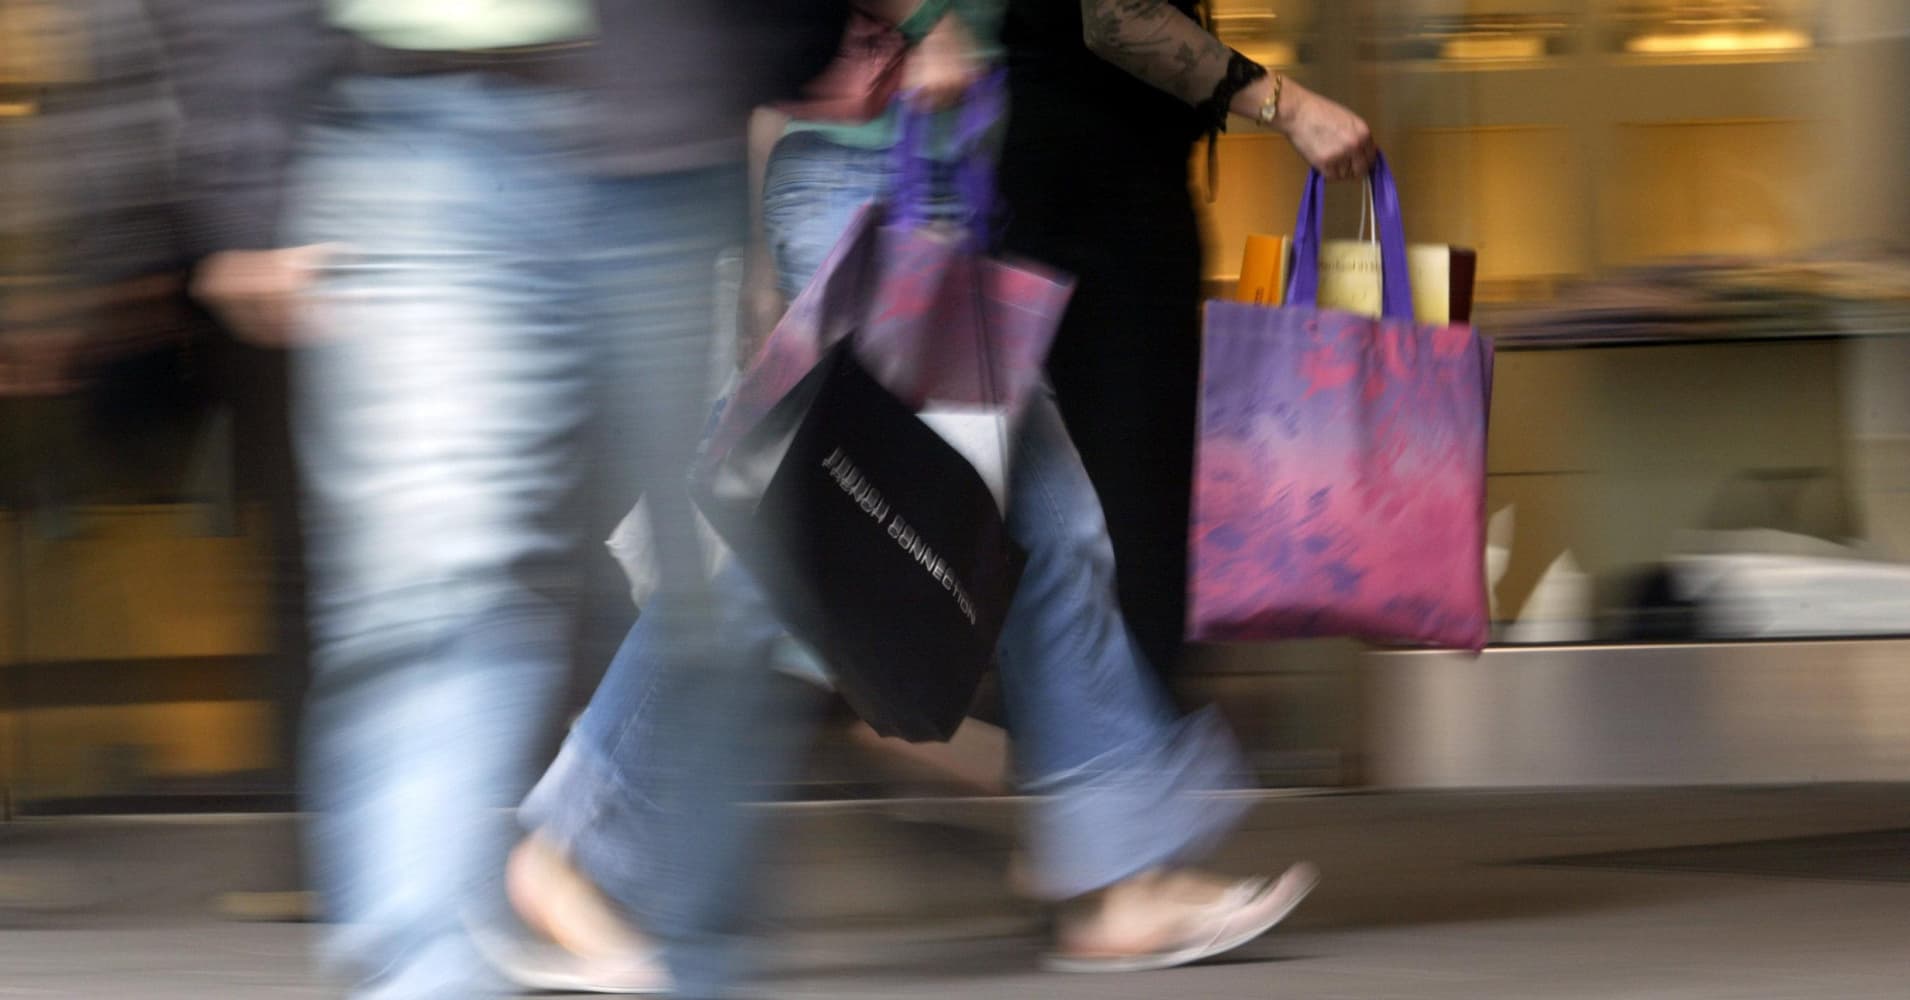 http://www.cnbc.com/2015/12/21/holiday-shopping-buy-this-analyst.html